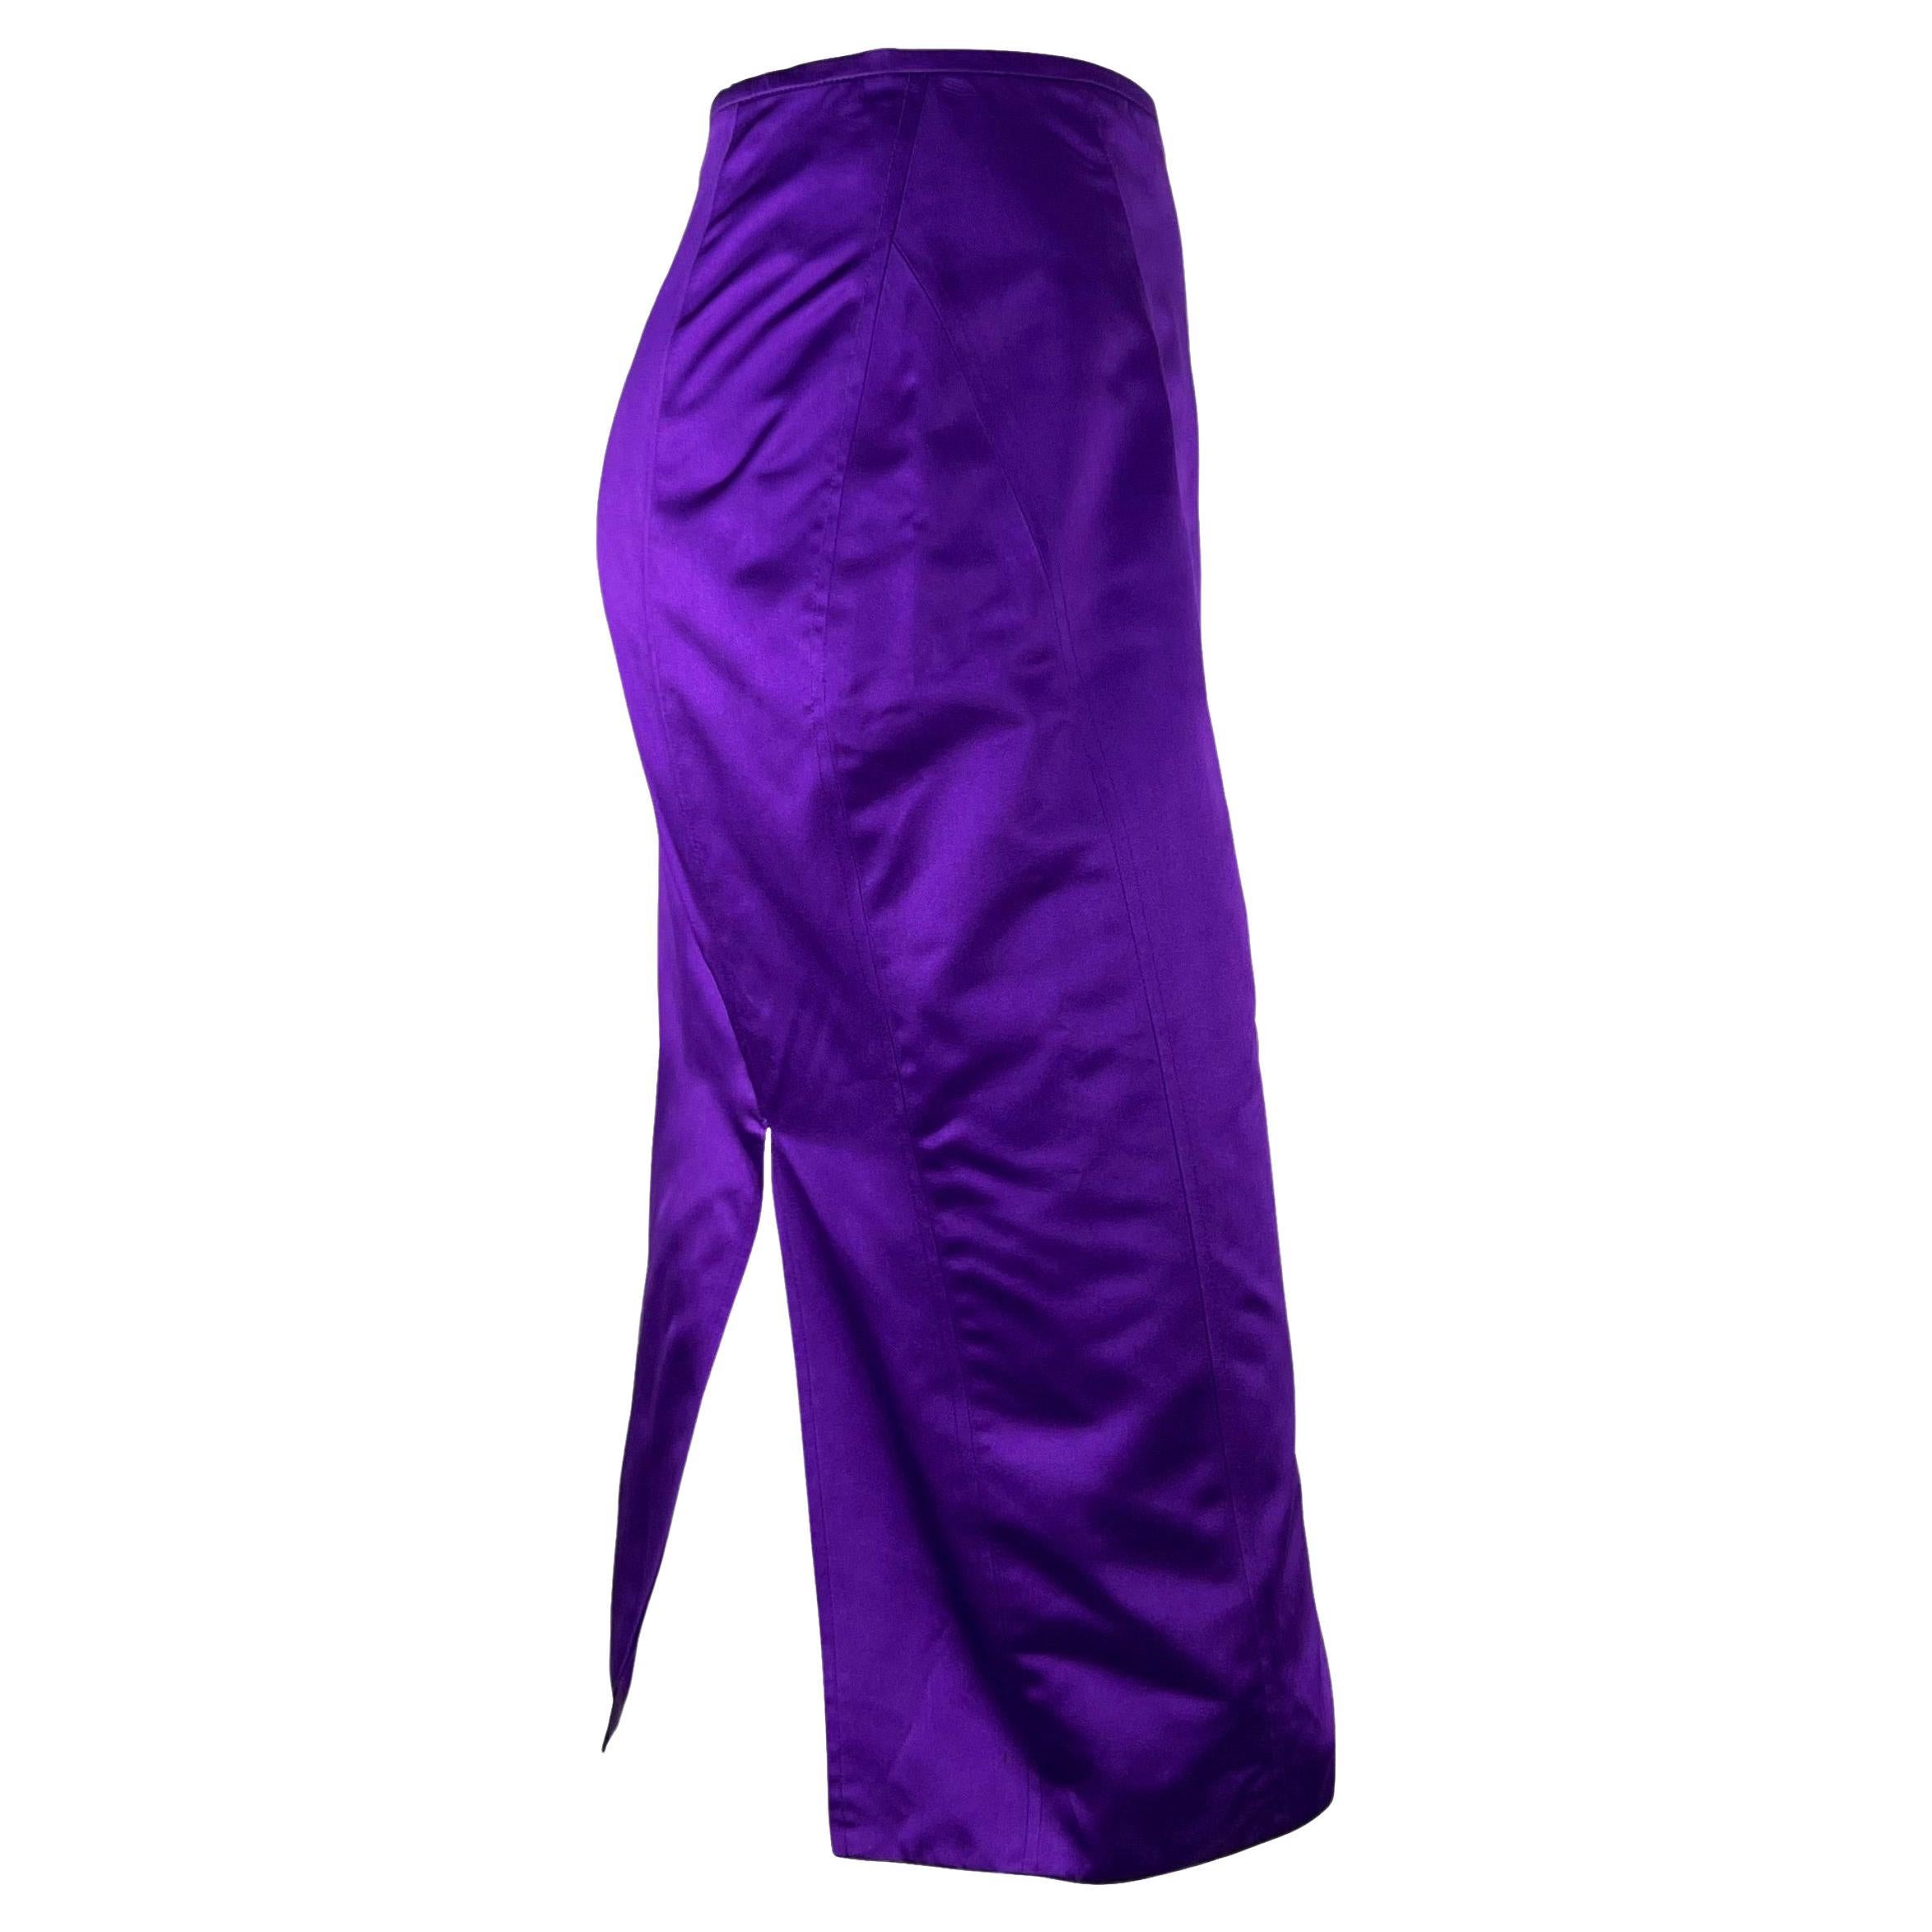 S/S 2001 Gucci by Tom Ford Runway Purple Satin Cargo Pocket Pencil Skirt For Sale 1